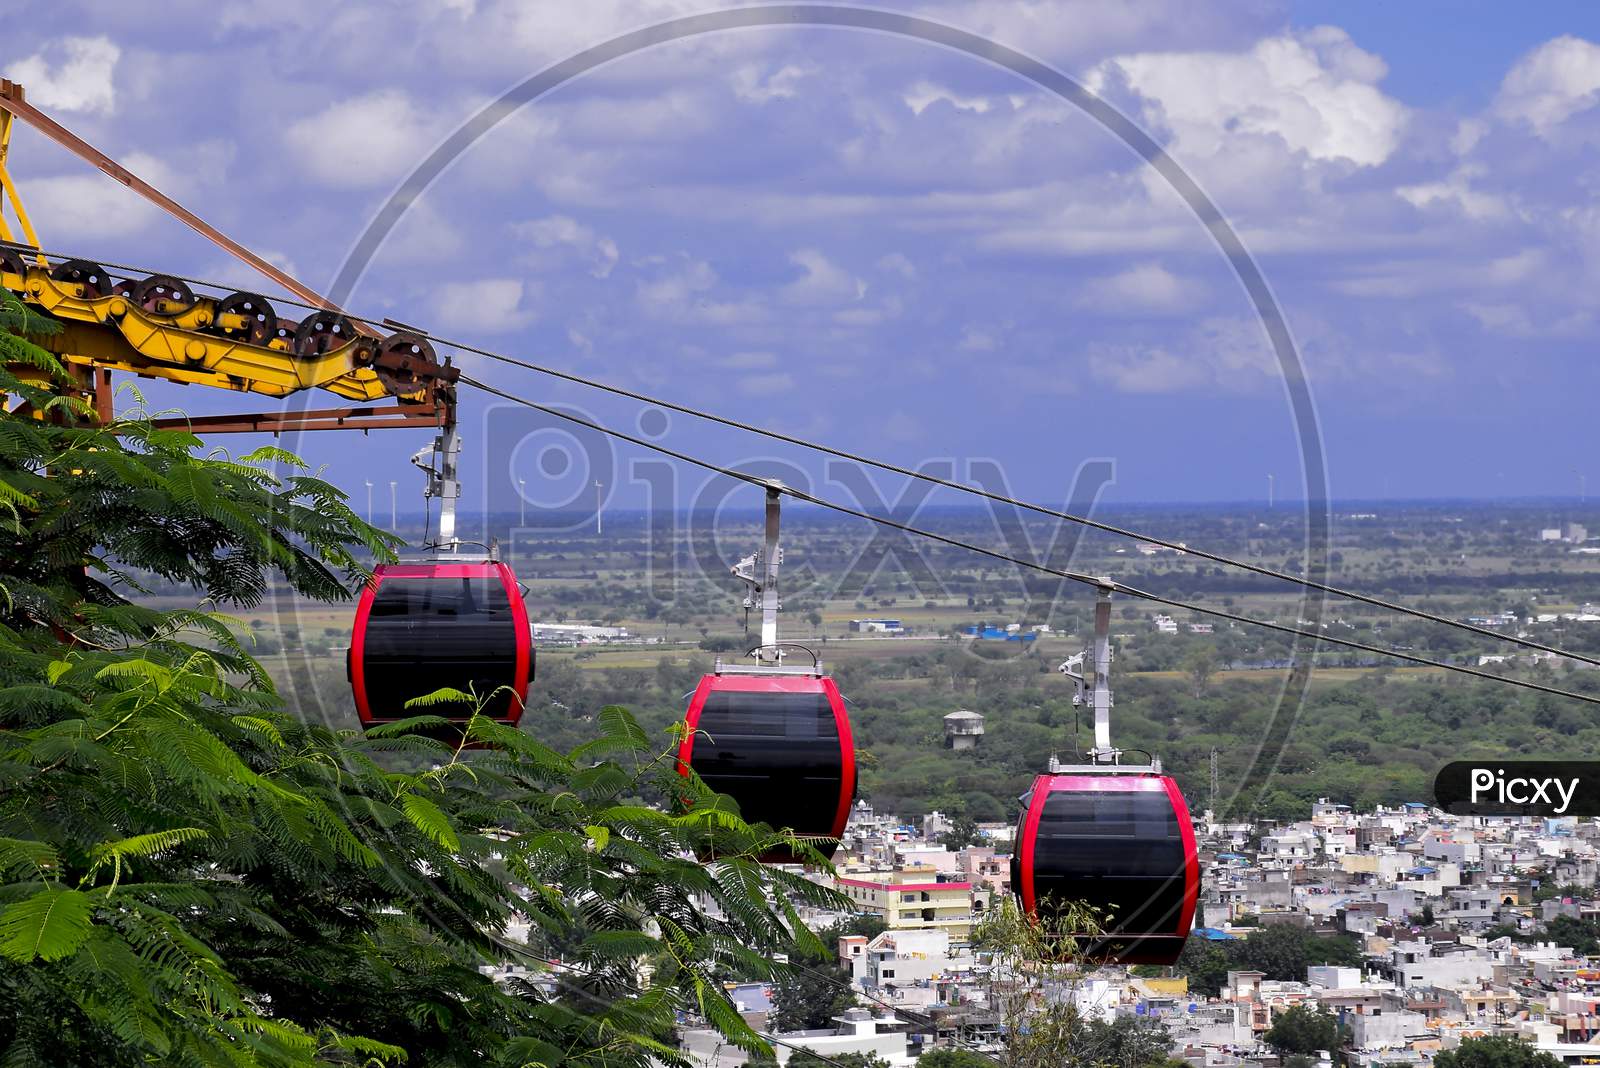 Beautiful View Of Dewas City And Rope-Way Cable Car, Taken From The Temple Of Maa Chamunda And Maa Tulja Bhavani, Situated On The Hill Of Dewas City.